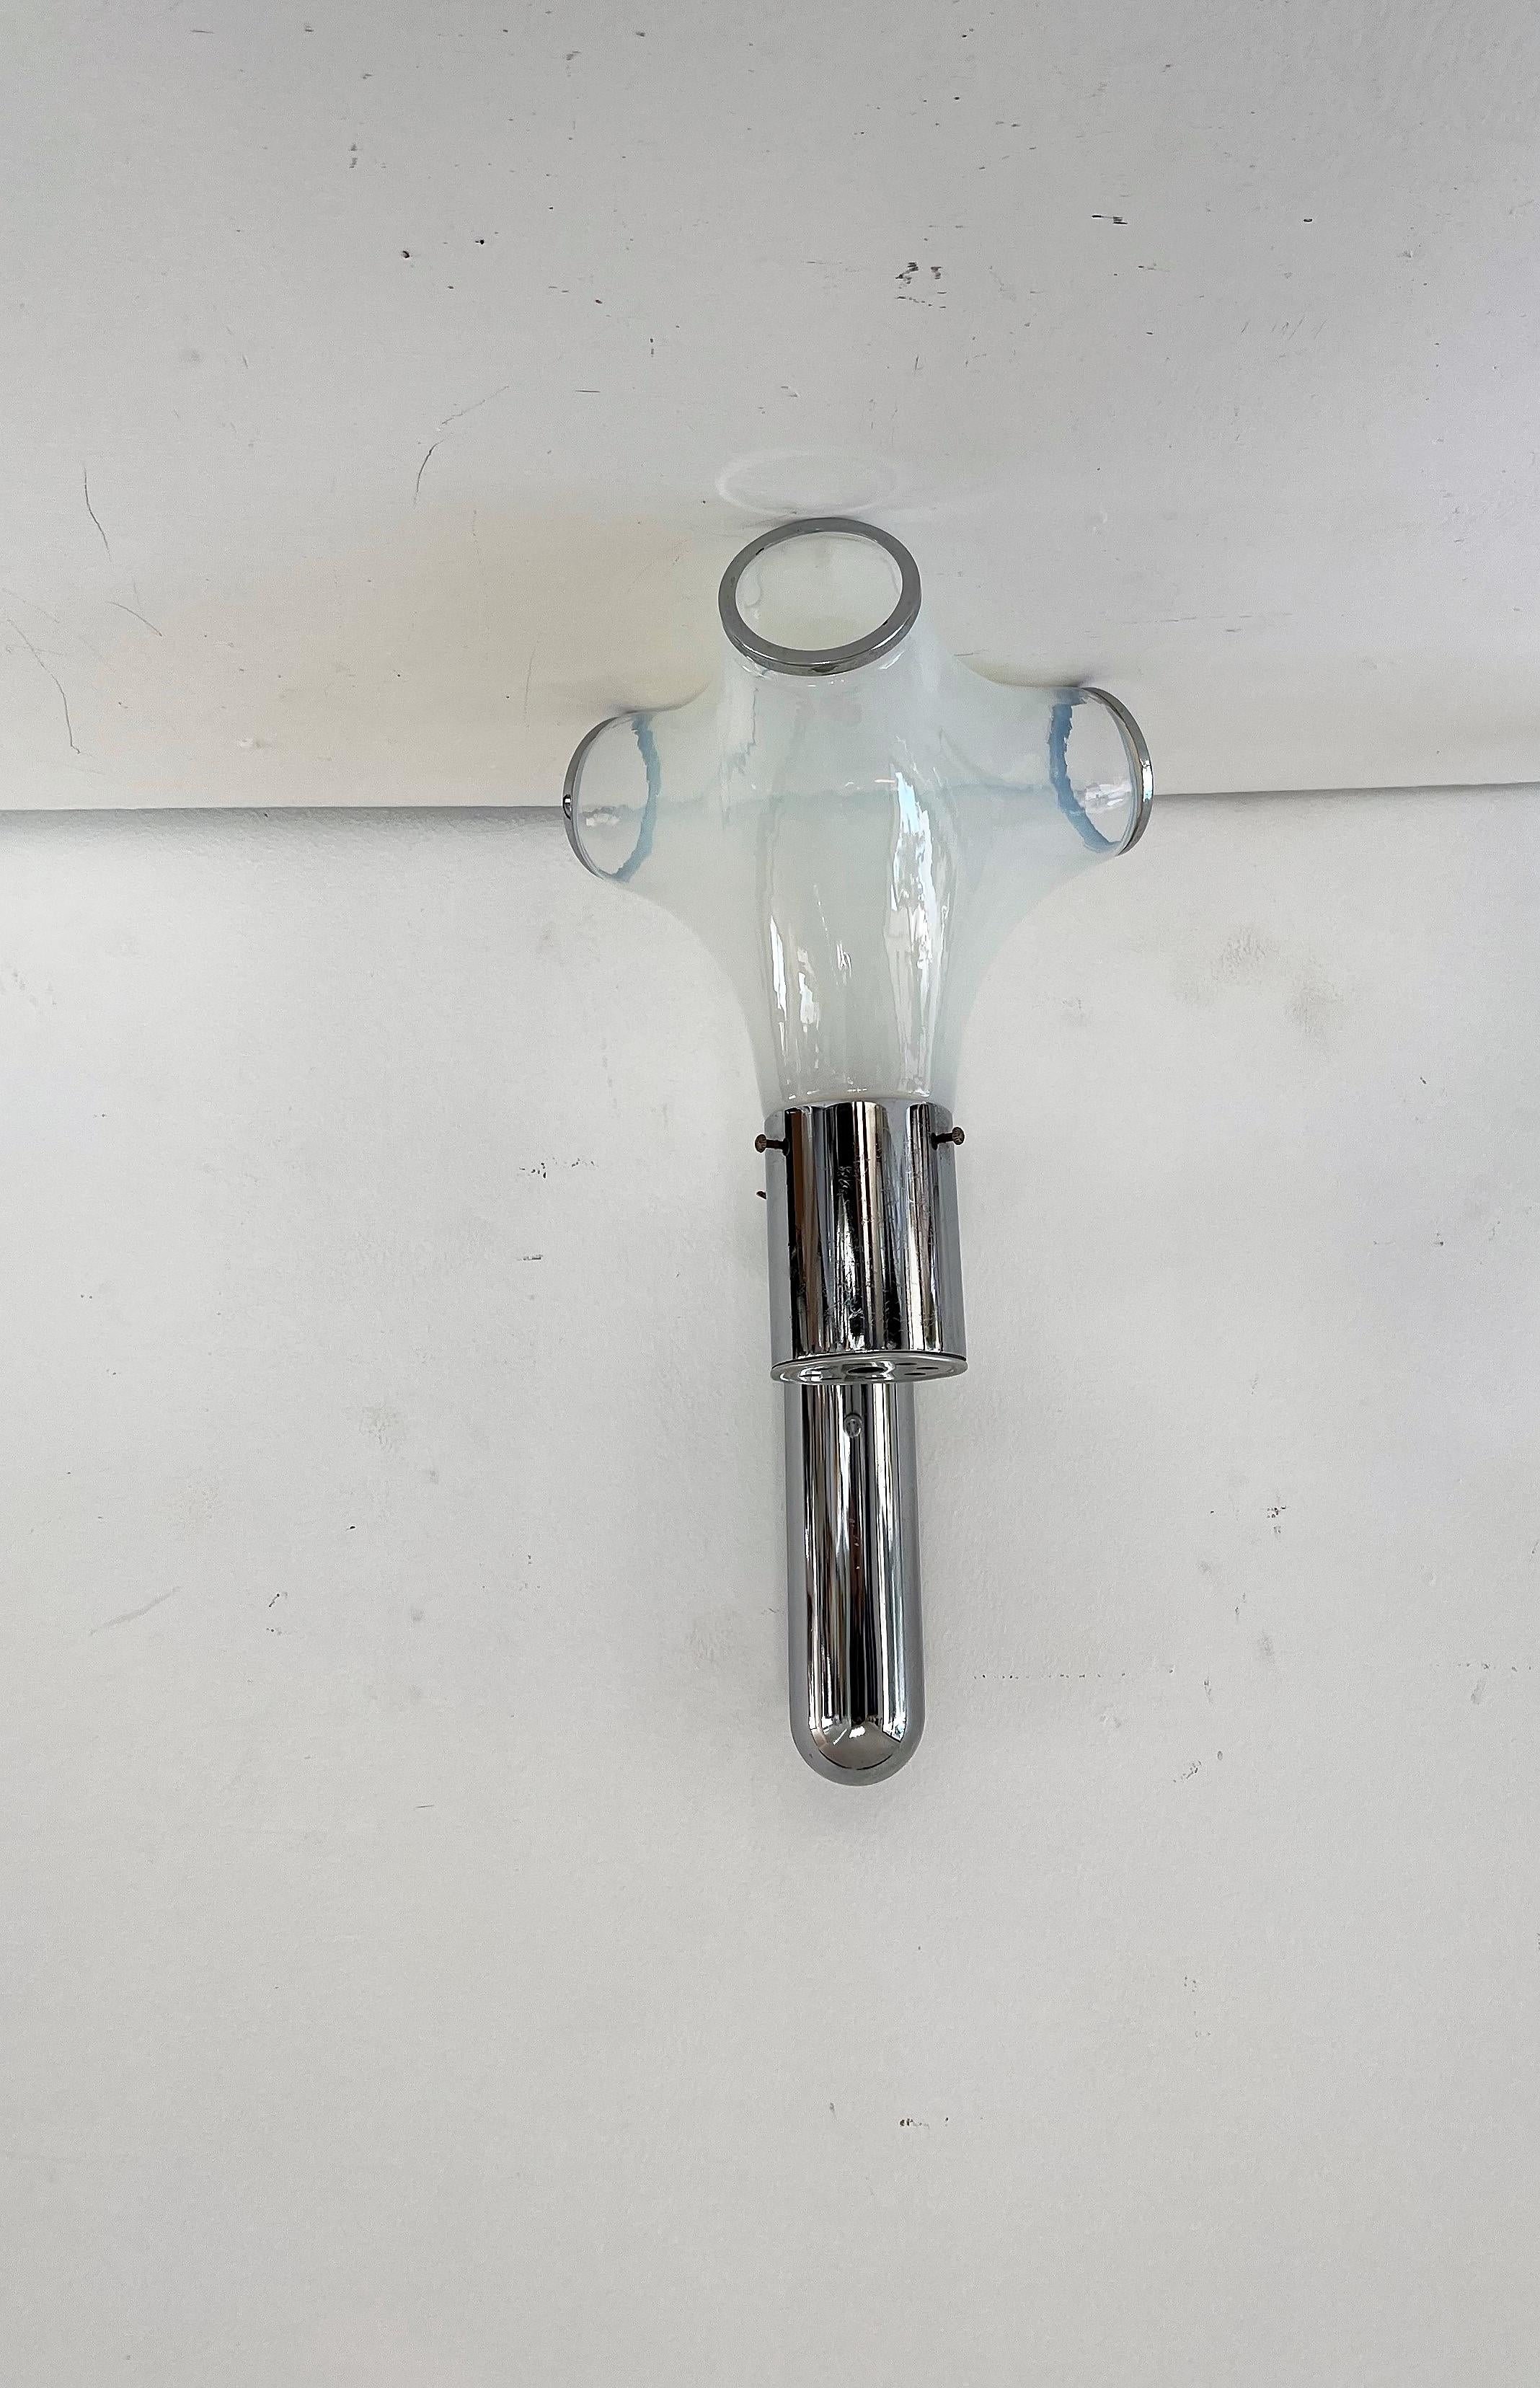 Gorgeous Space Age sconces designed by Aldo Nason for Mazzega circa 1970 in Murano Italy.
Manufactured in opalescent blue Murano glass and chromed hardware this sconce is a great example of Space- Age design.
The sconce takes 1 e14 bulb.
4